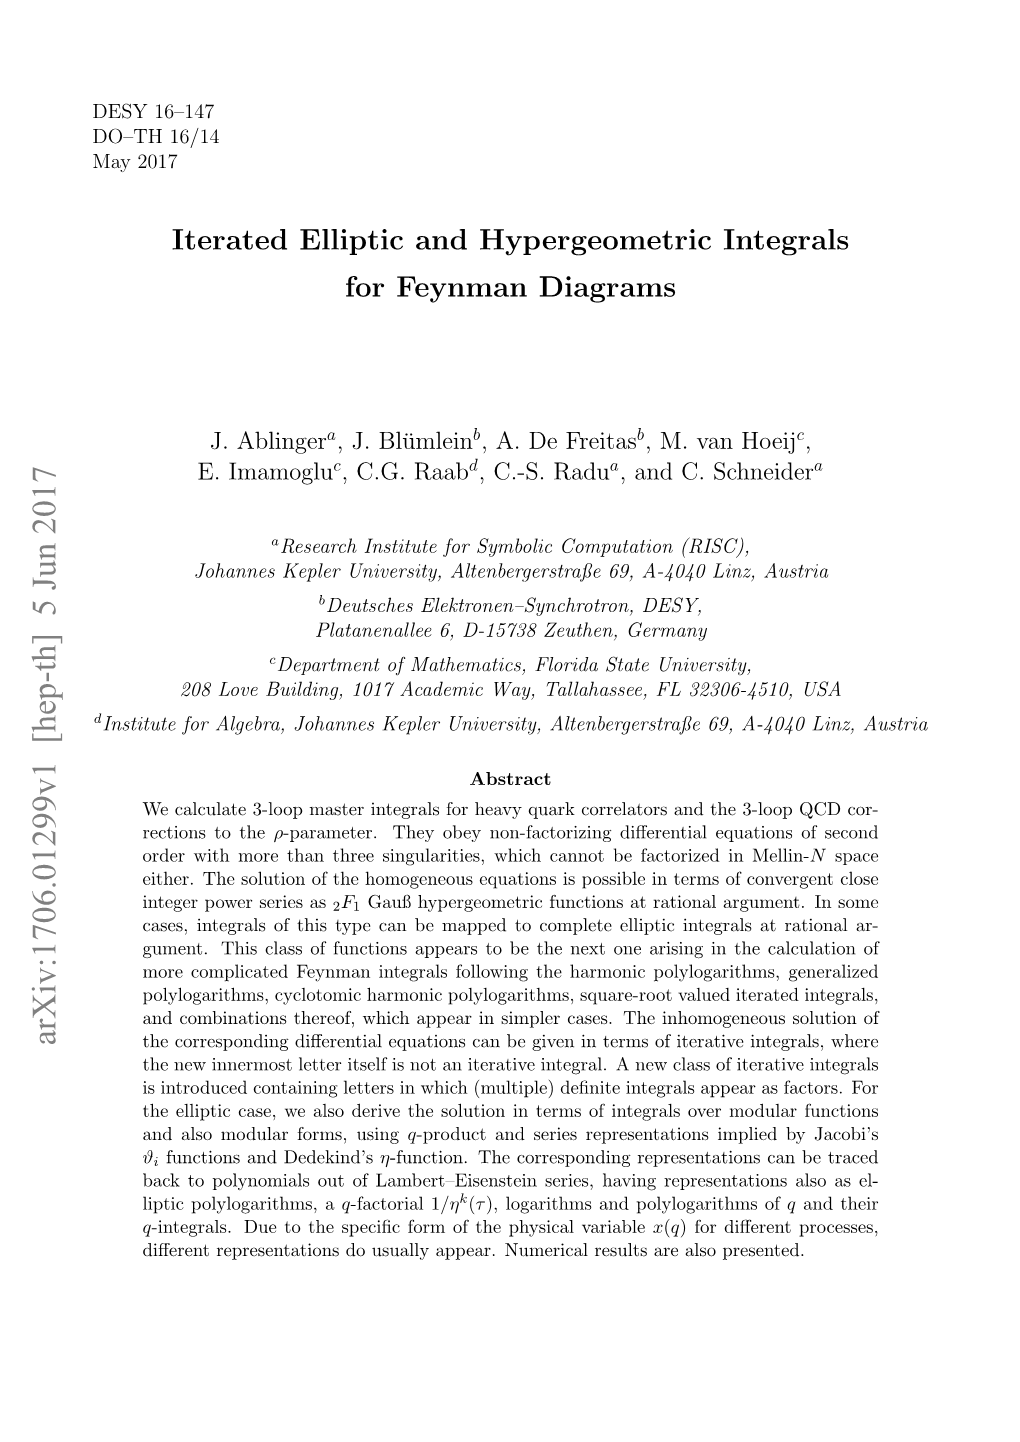 Iterated Elliptic and Hypergeometric Integrals for Feynman Diagrams